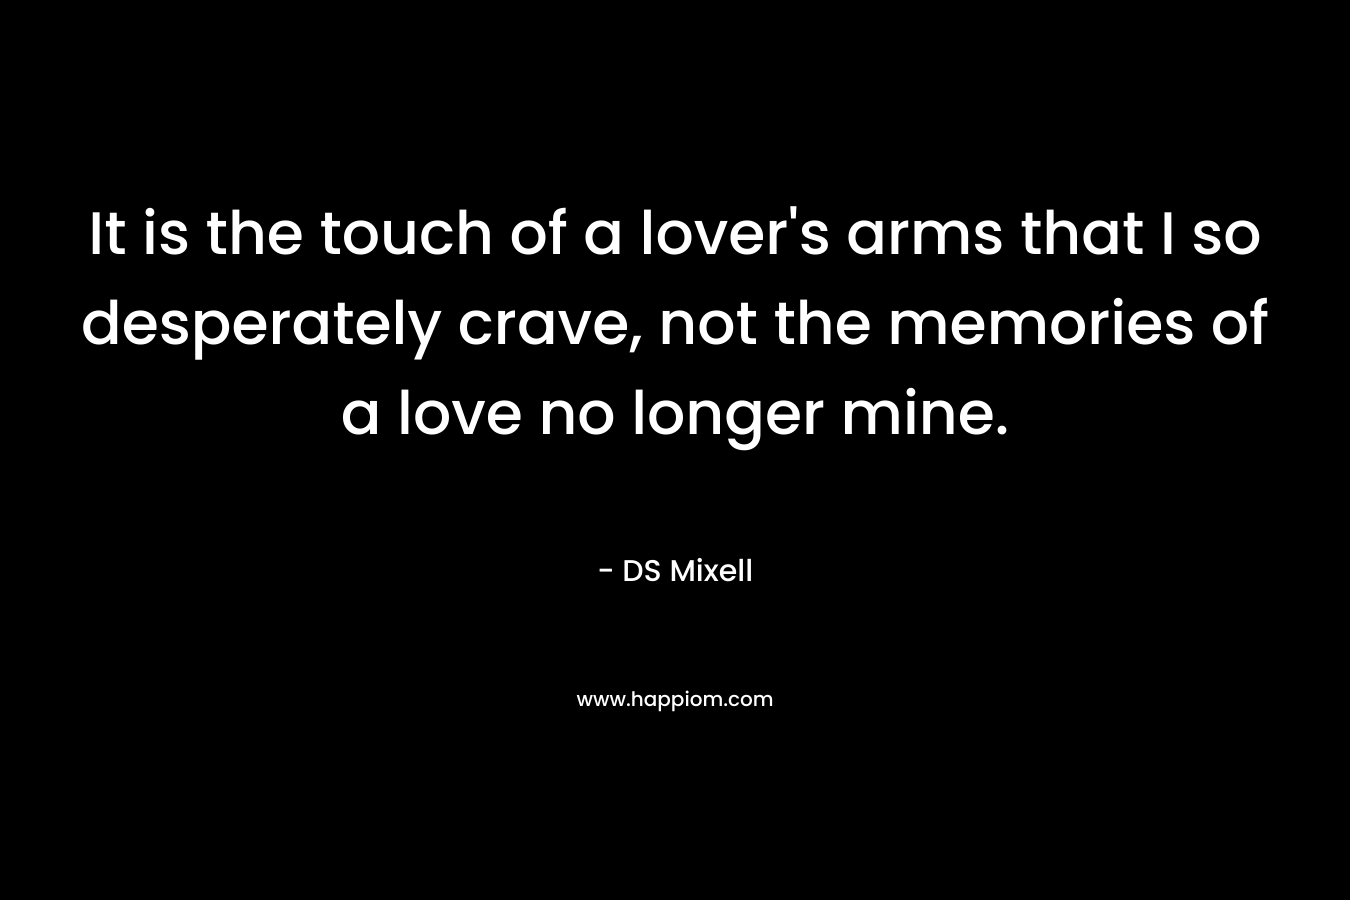 It is the touch of a lover’s arms that I so desperately crave, not the memories of a love no longer mine. – DS Mixell